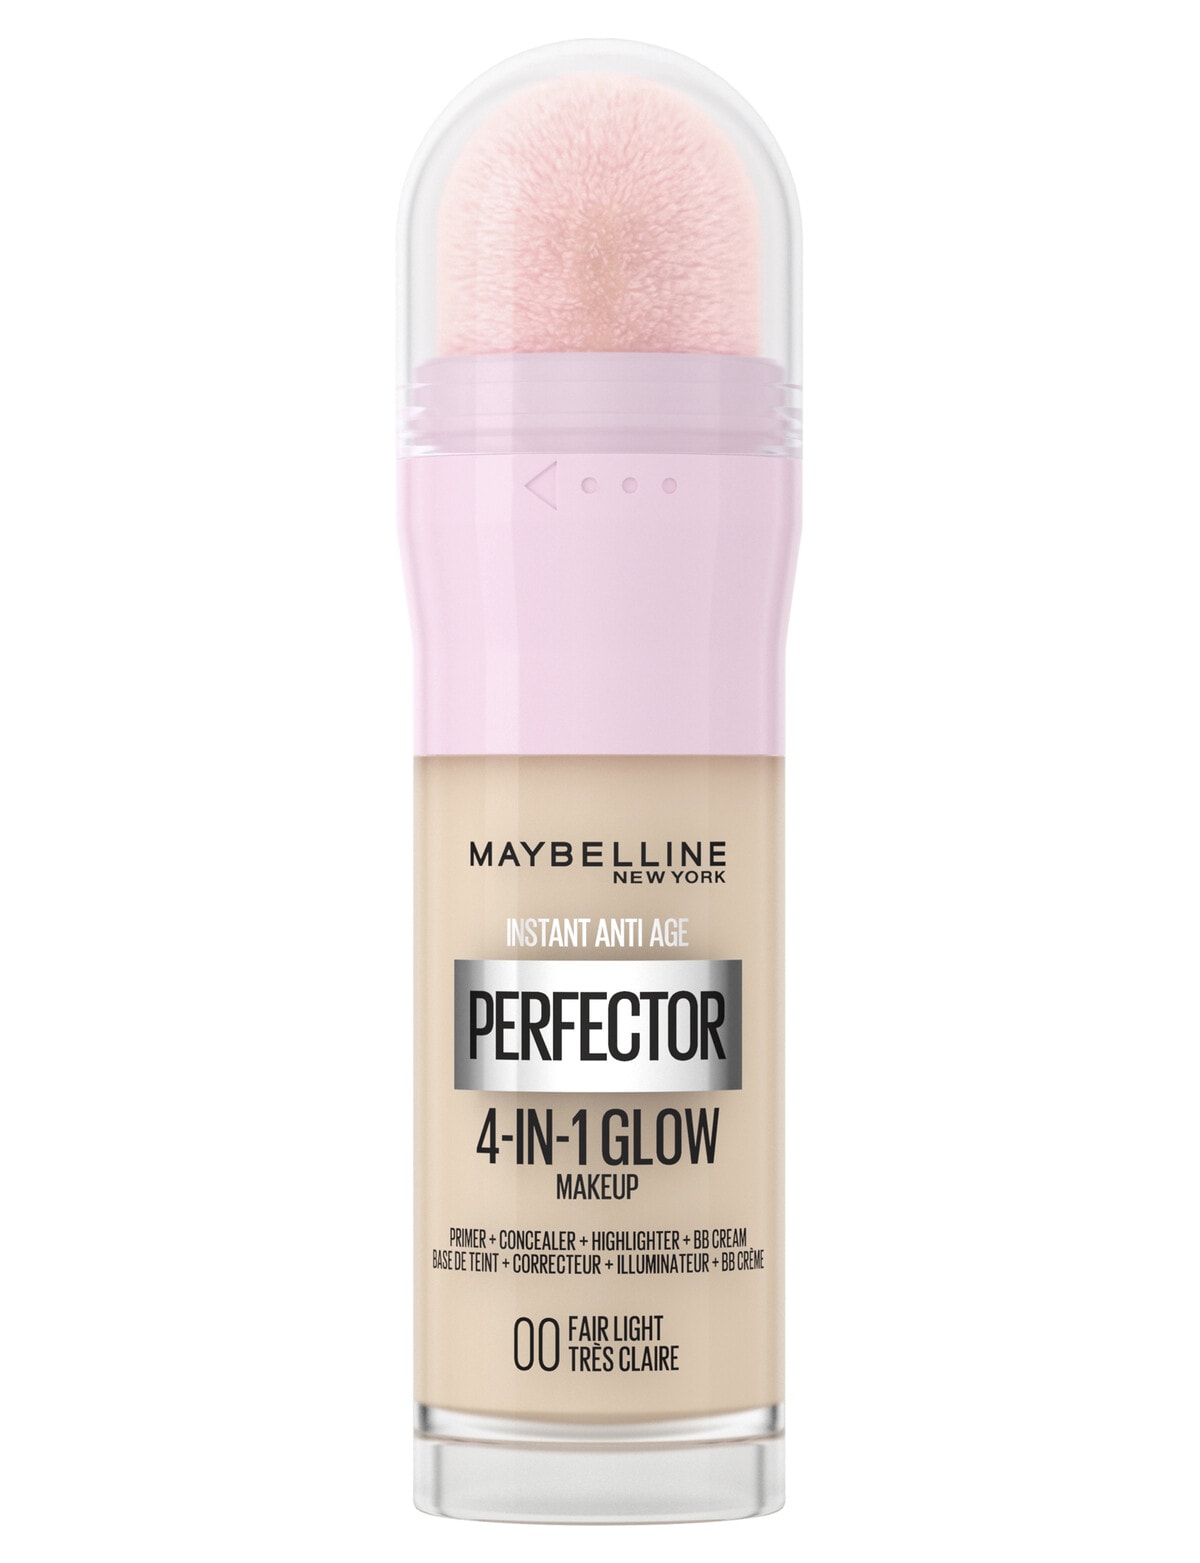 Rewind 4-In-1 Instant Age - Glow Face Maybelline Makeup Instant Perfector